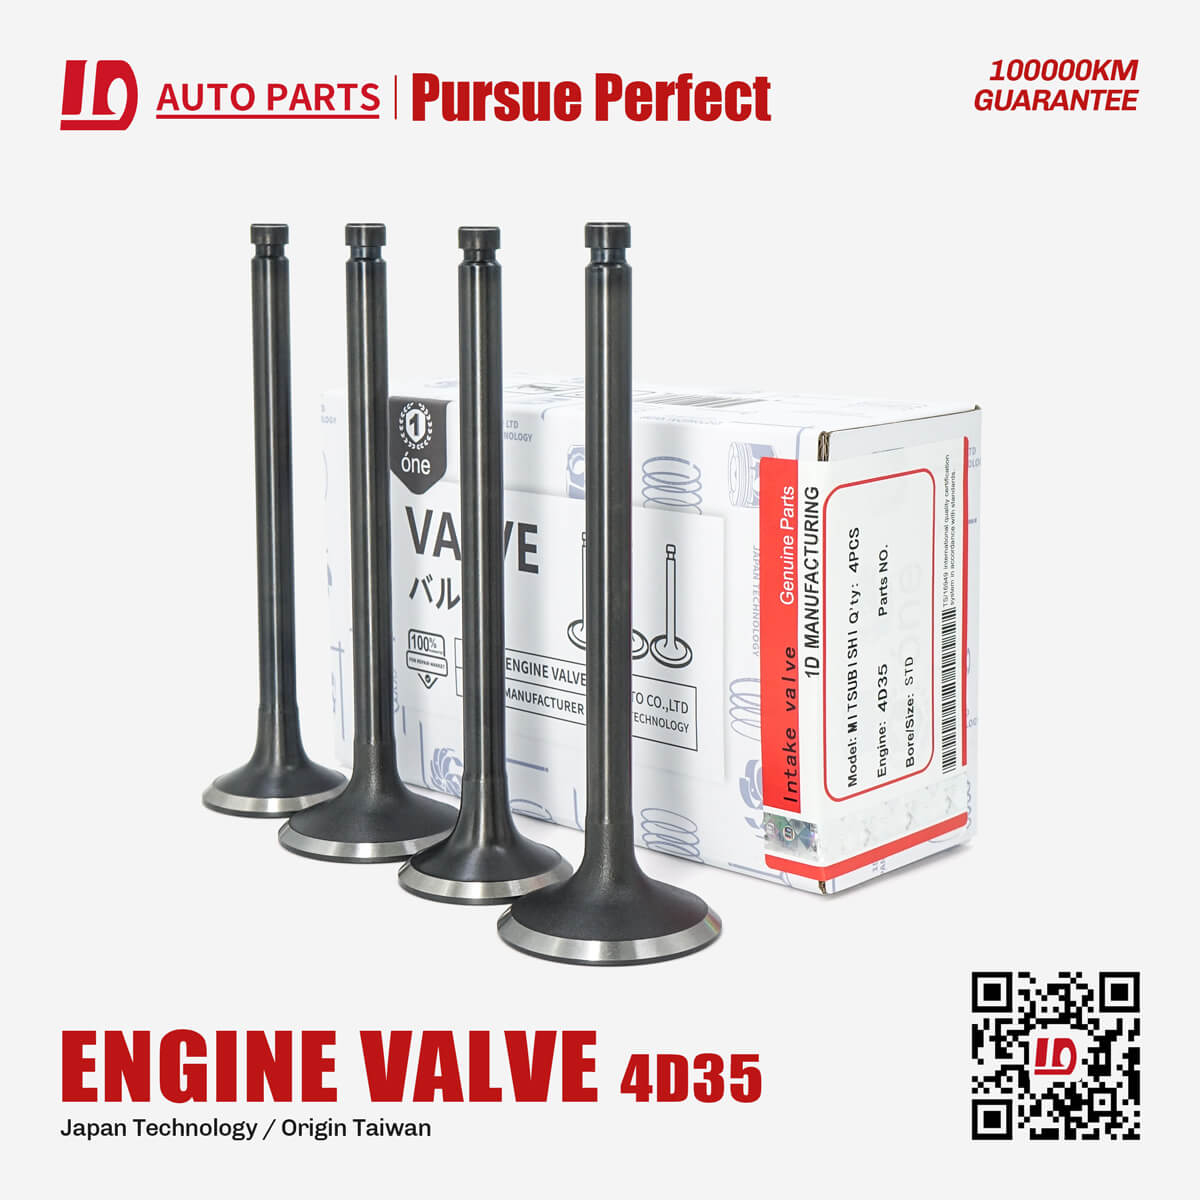 Engine valves ME031937 intake and ME031154 exhaust valves For engine valve 4D35